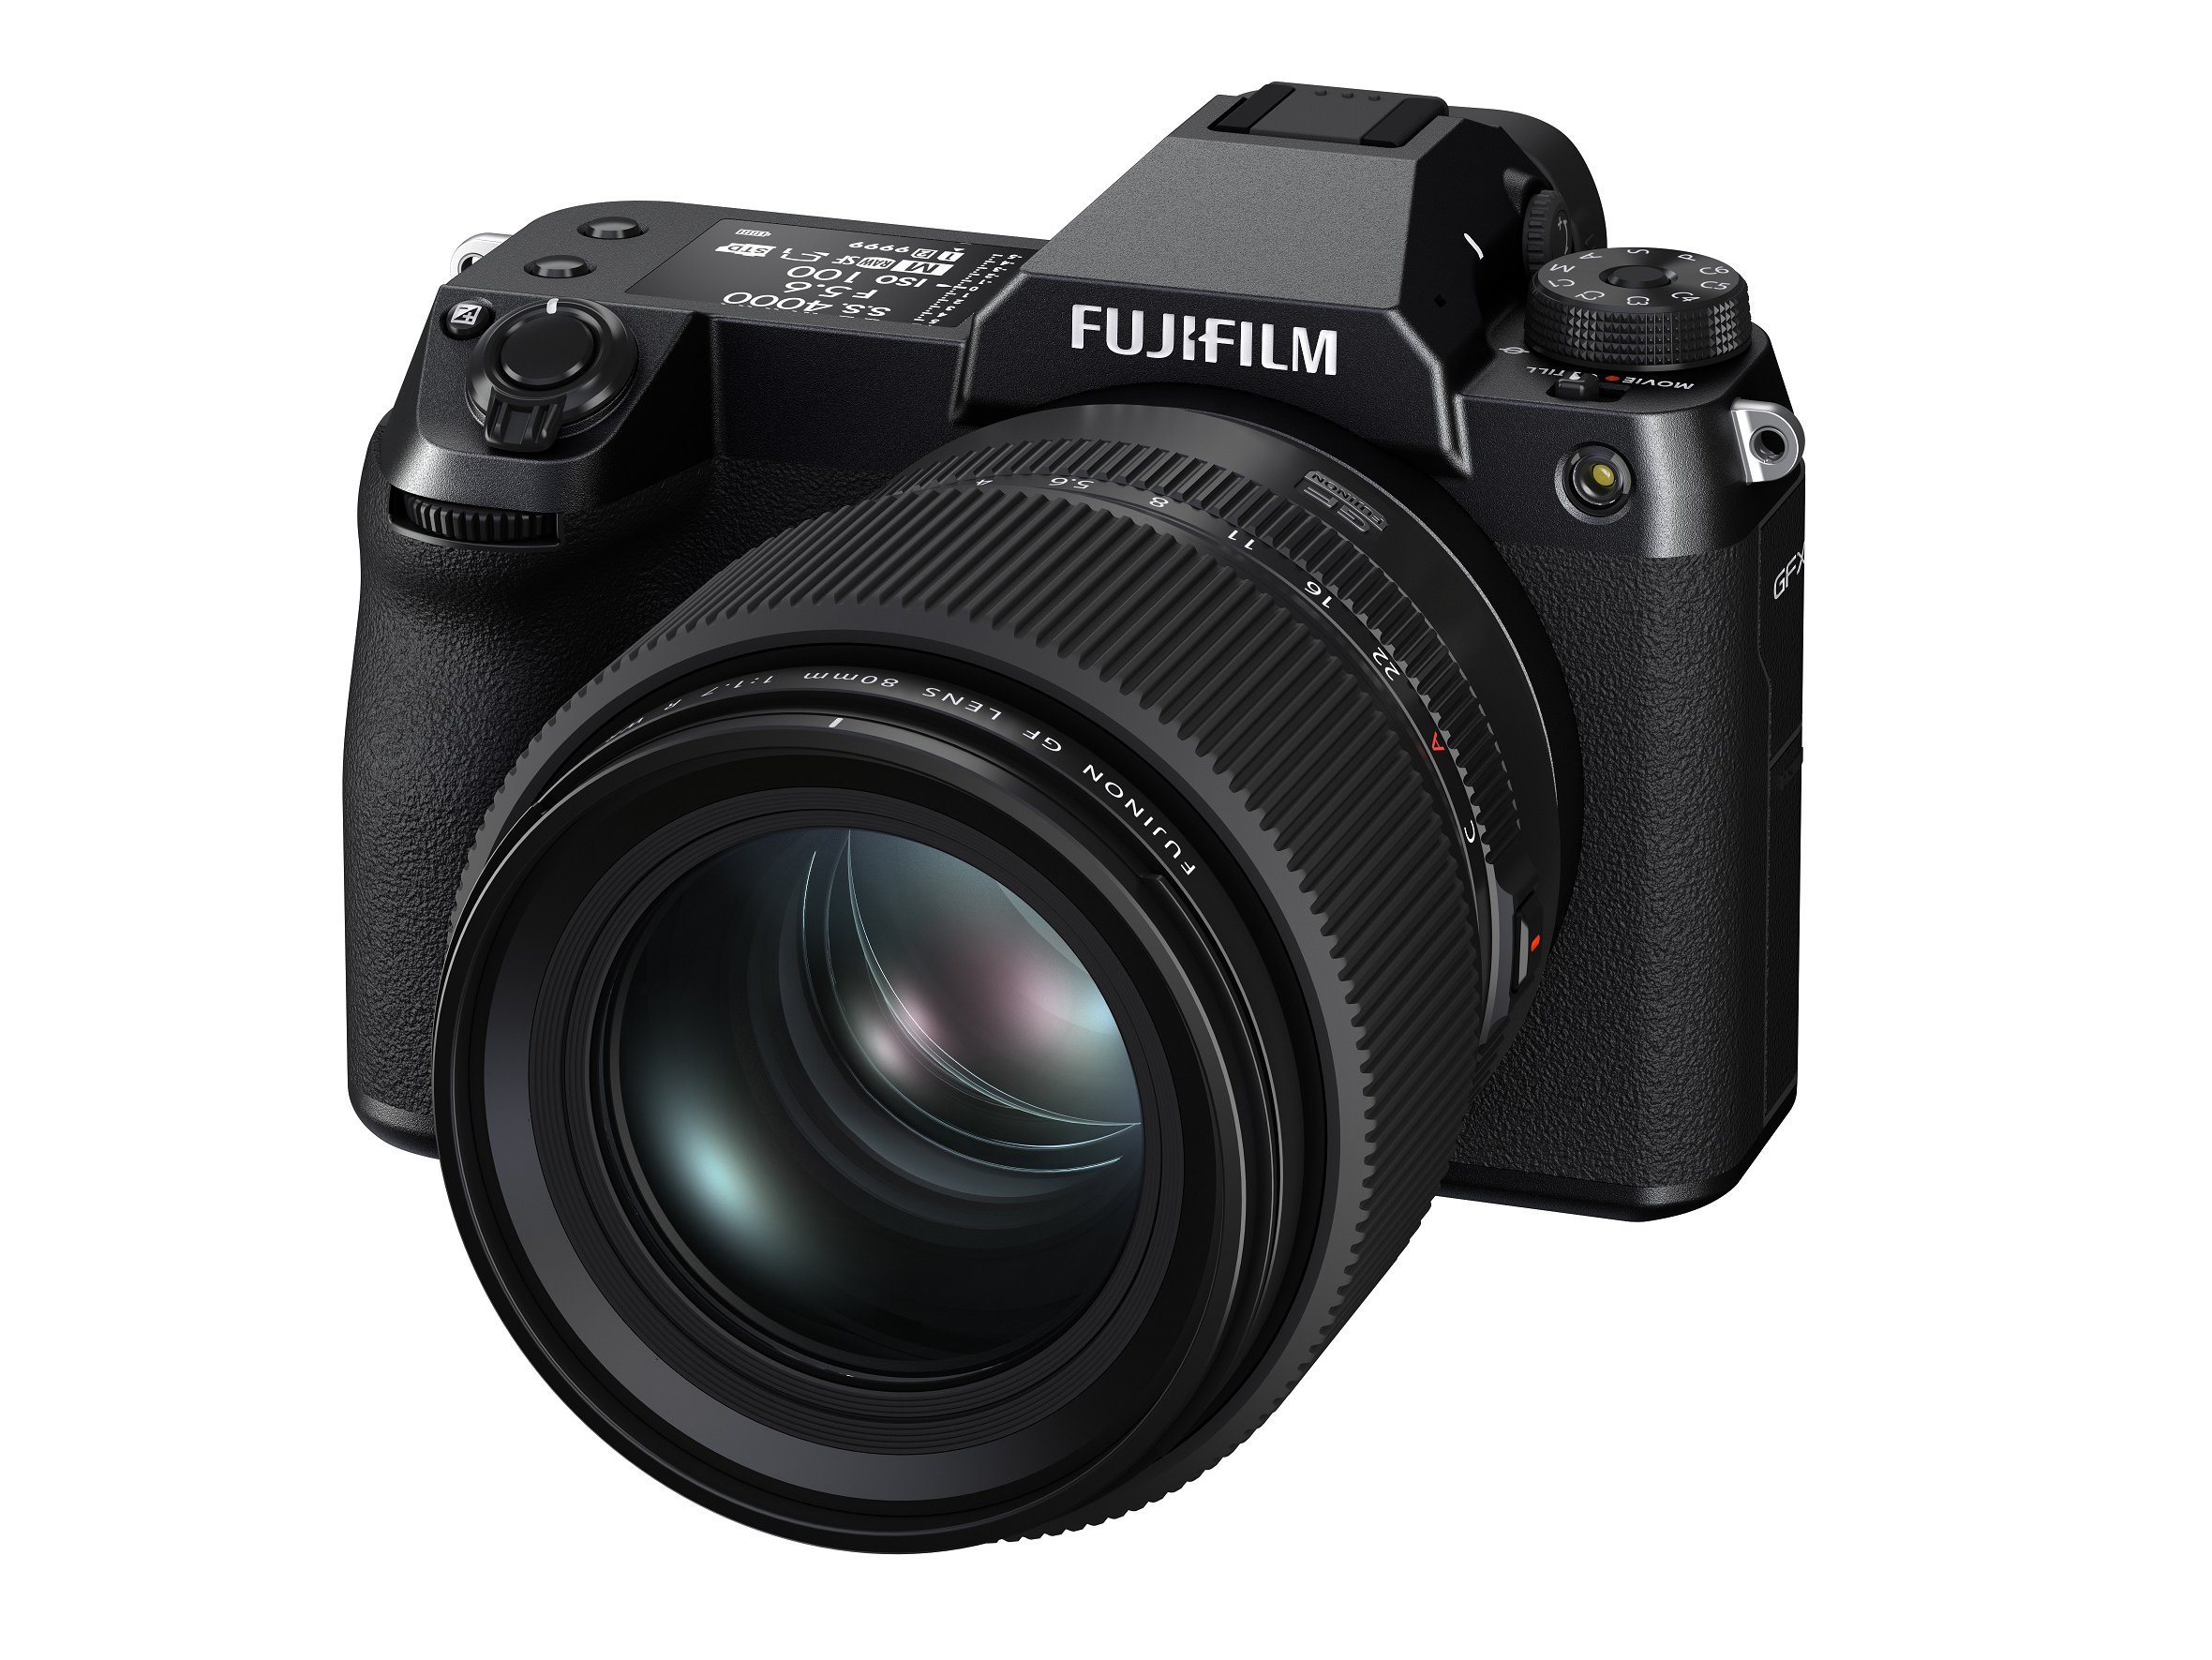 Fujifilm’s new 102-megapixel camera is the size of a typical DSLR